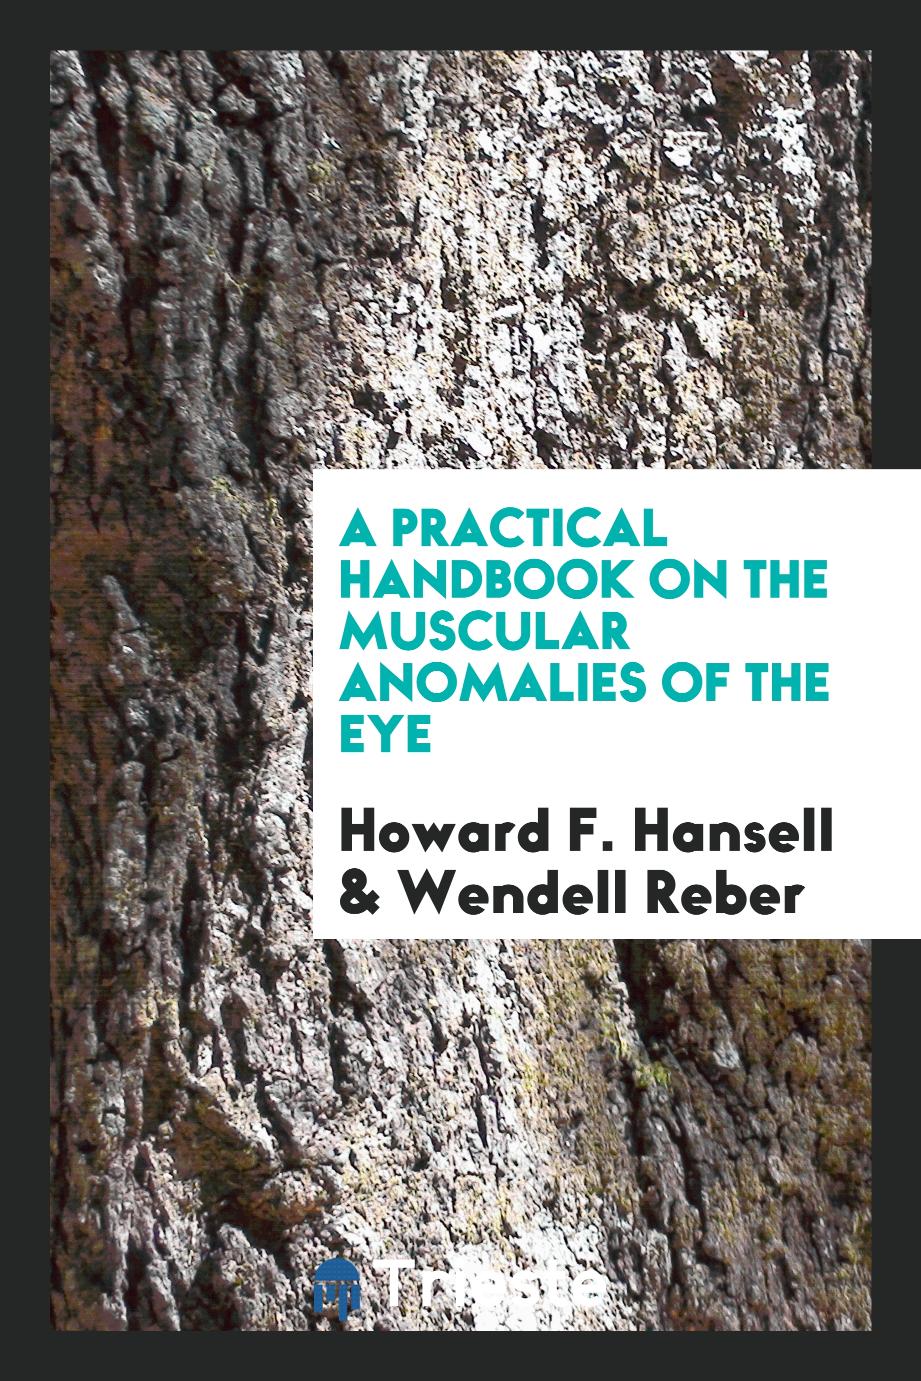 A practical handbook on the muscular anomalies of the eye